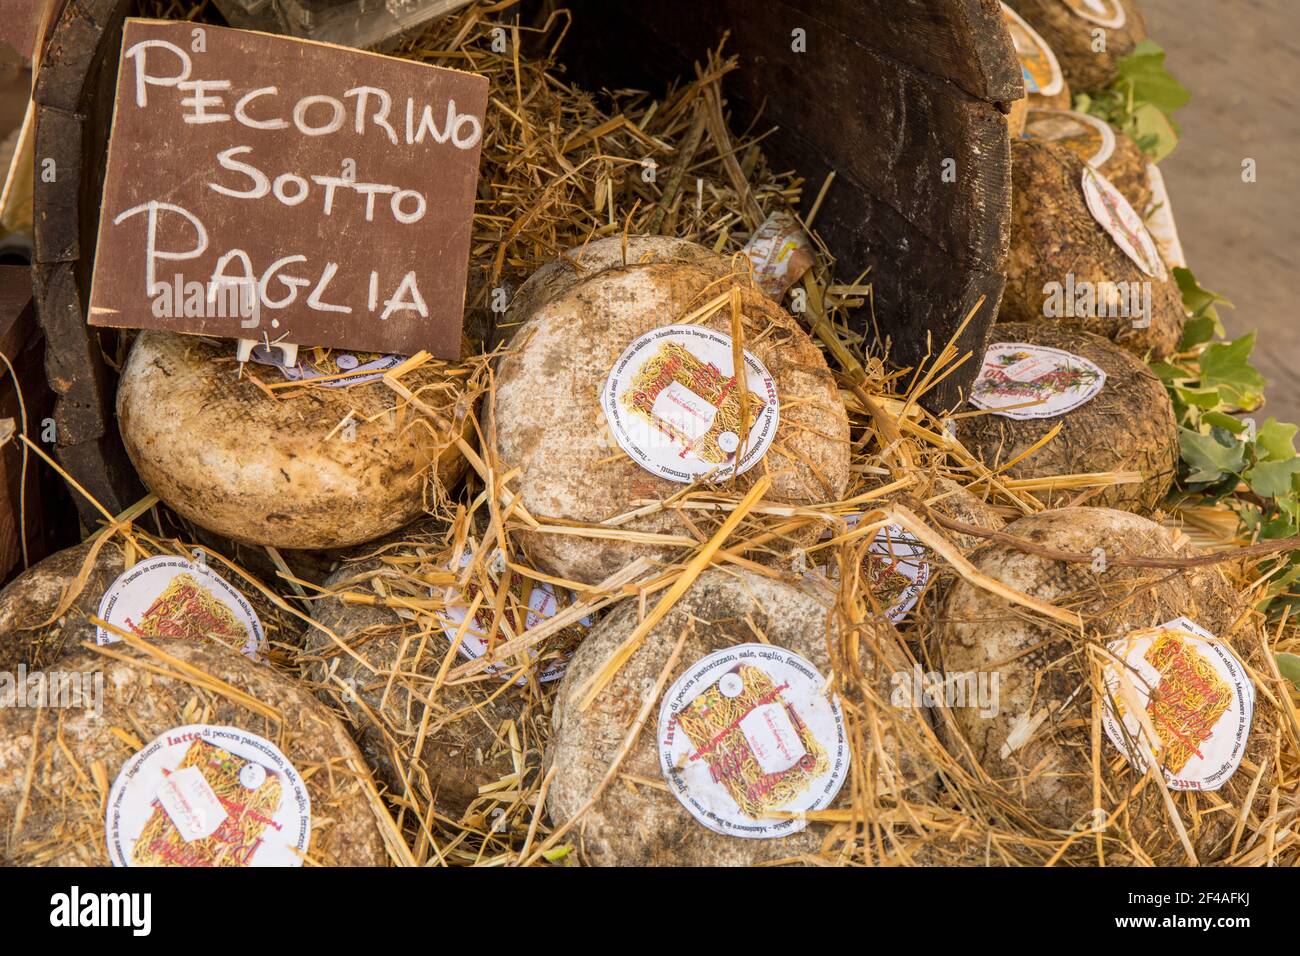 Cortona, Italy.  Pecorino Sotto Paglia cheese rounds aged under straw for sale at an outdoor market. Stock Photo